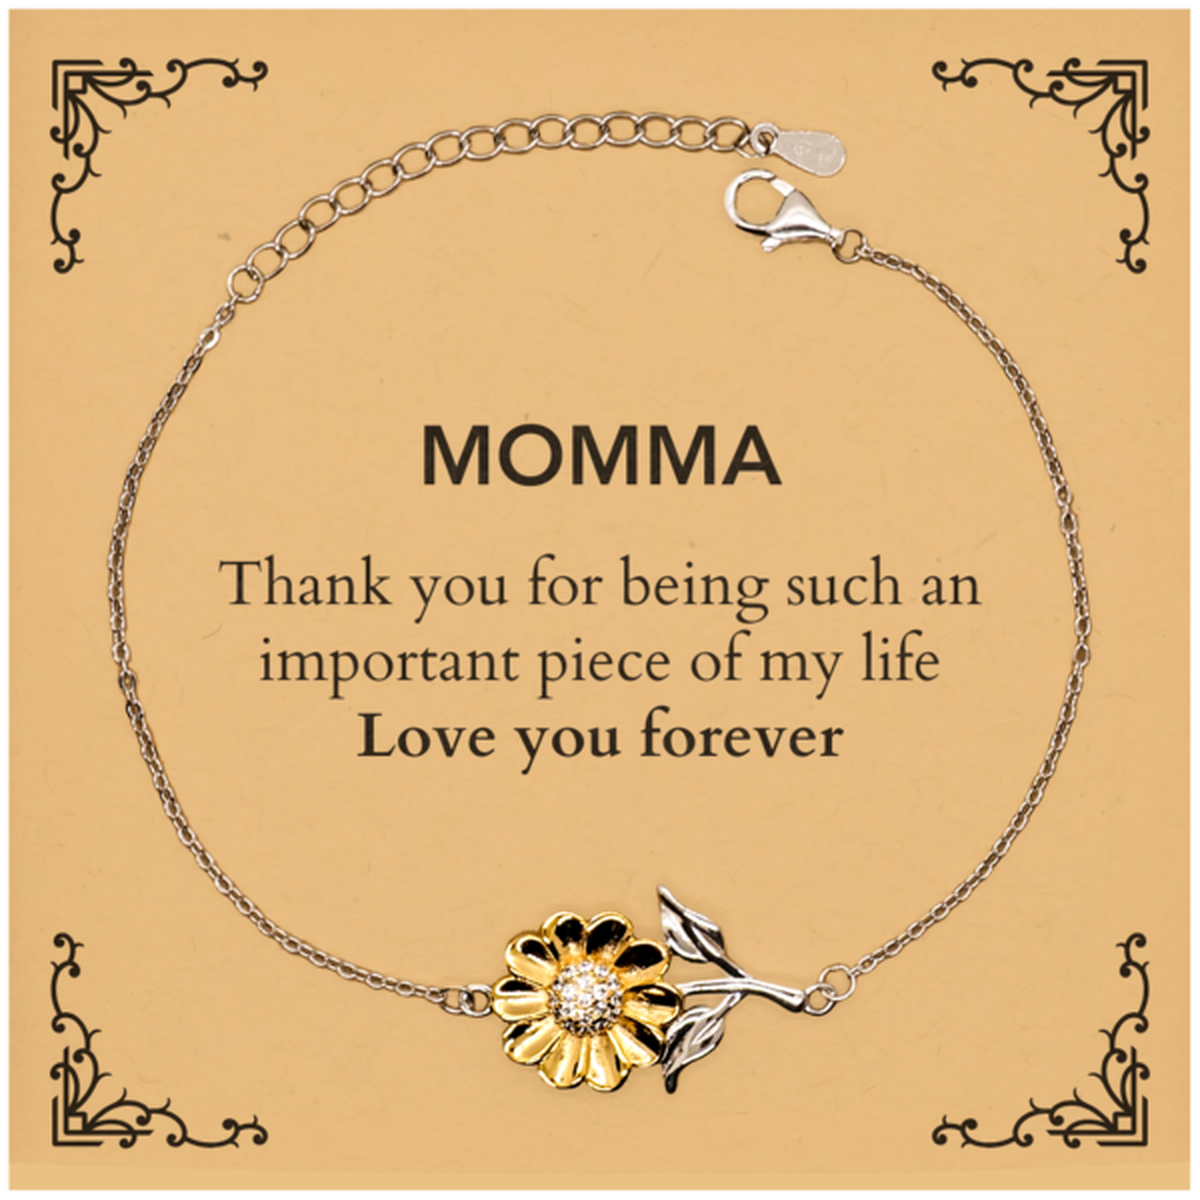 Appropriate Momma Sunflower Bracelet Epic Birthday Gifts for Momma Thank you for being such an important piece of my life Momma Christmas Mothers Fathers Day